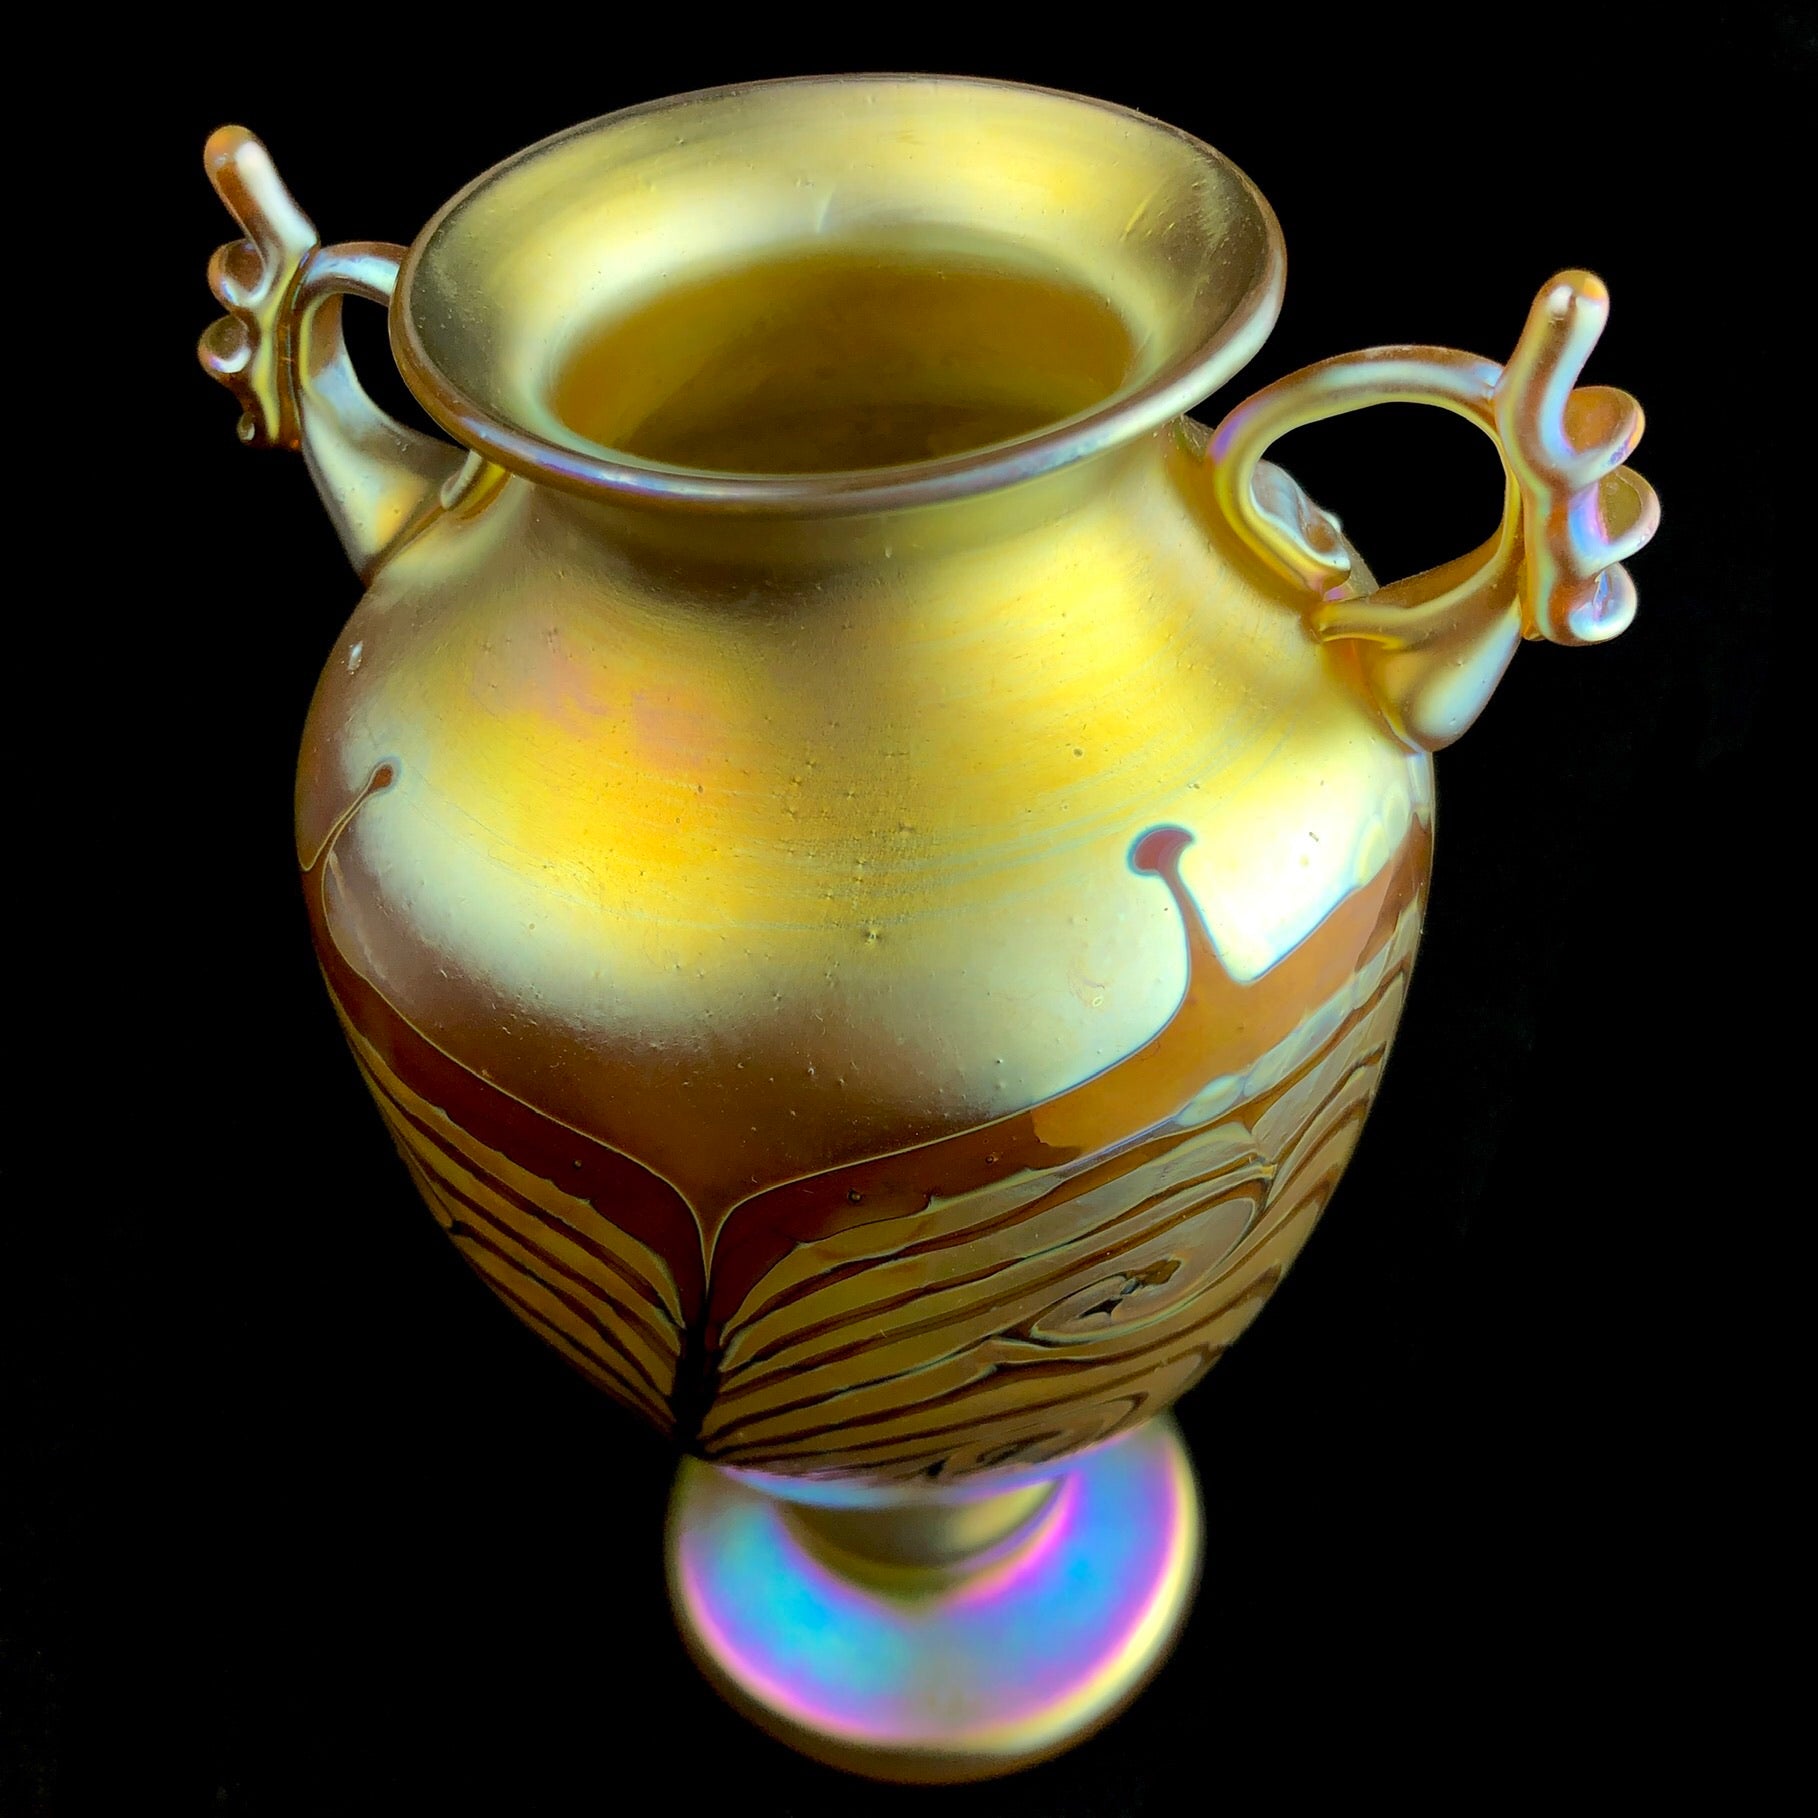 Top view of iridescent yellow glass vase with handle detail